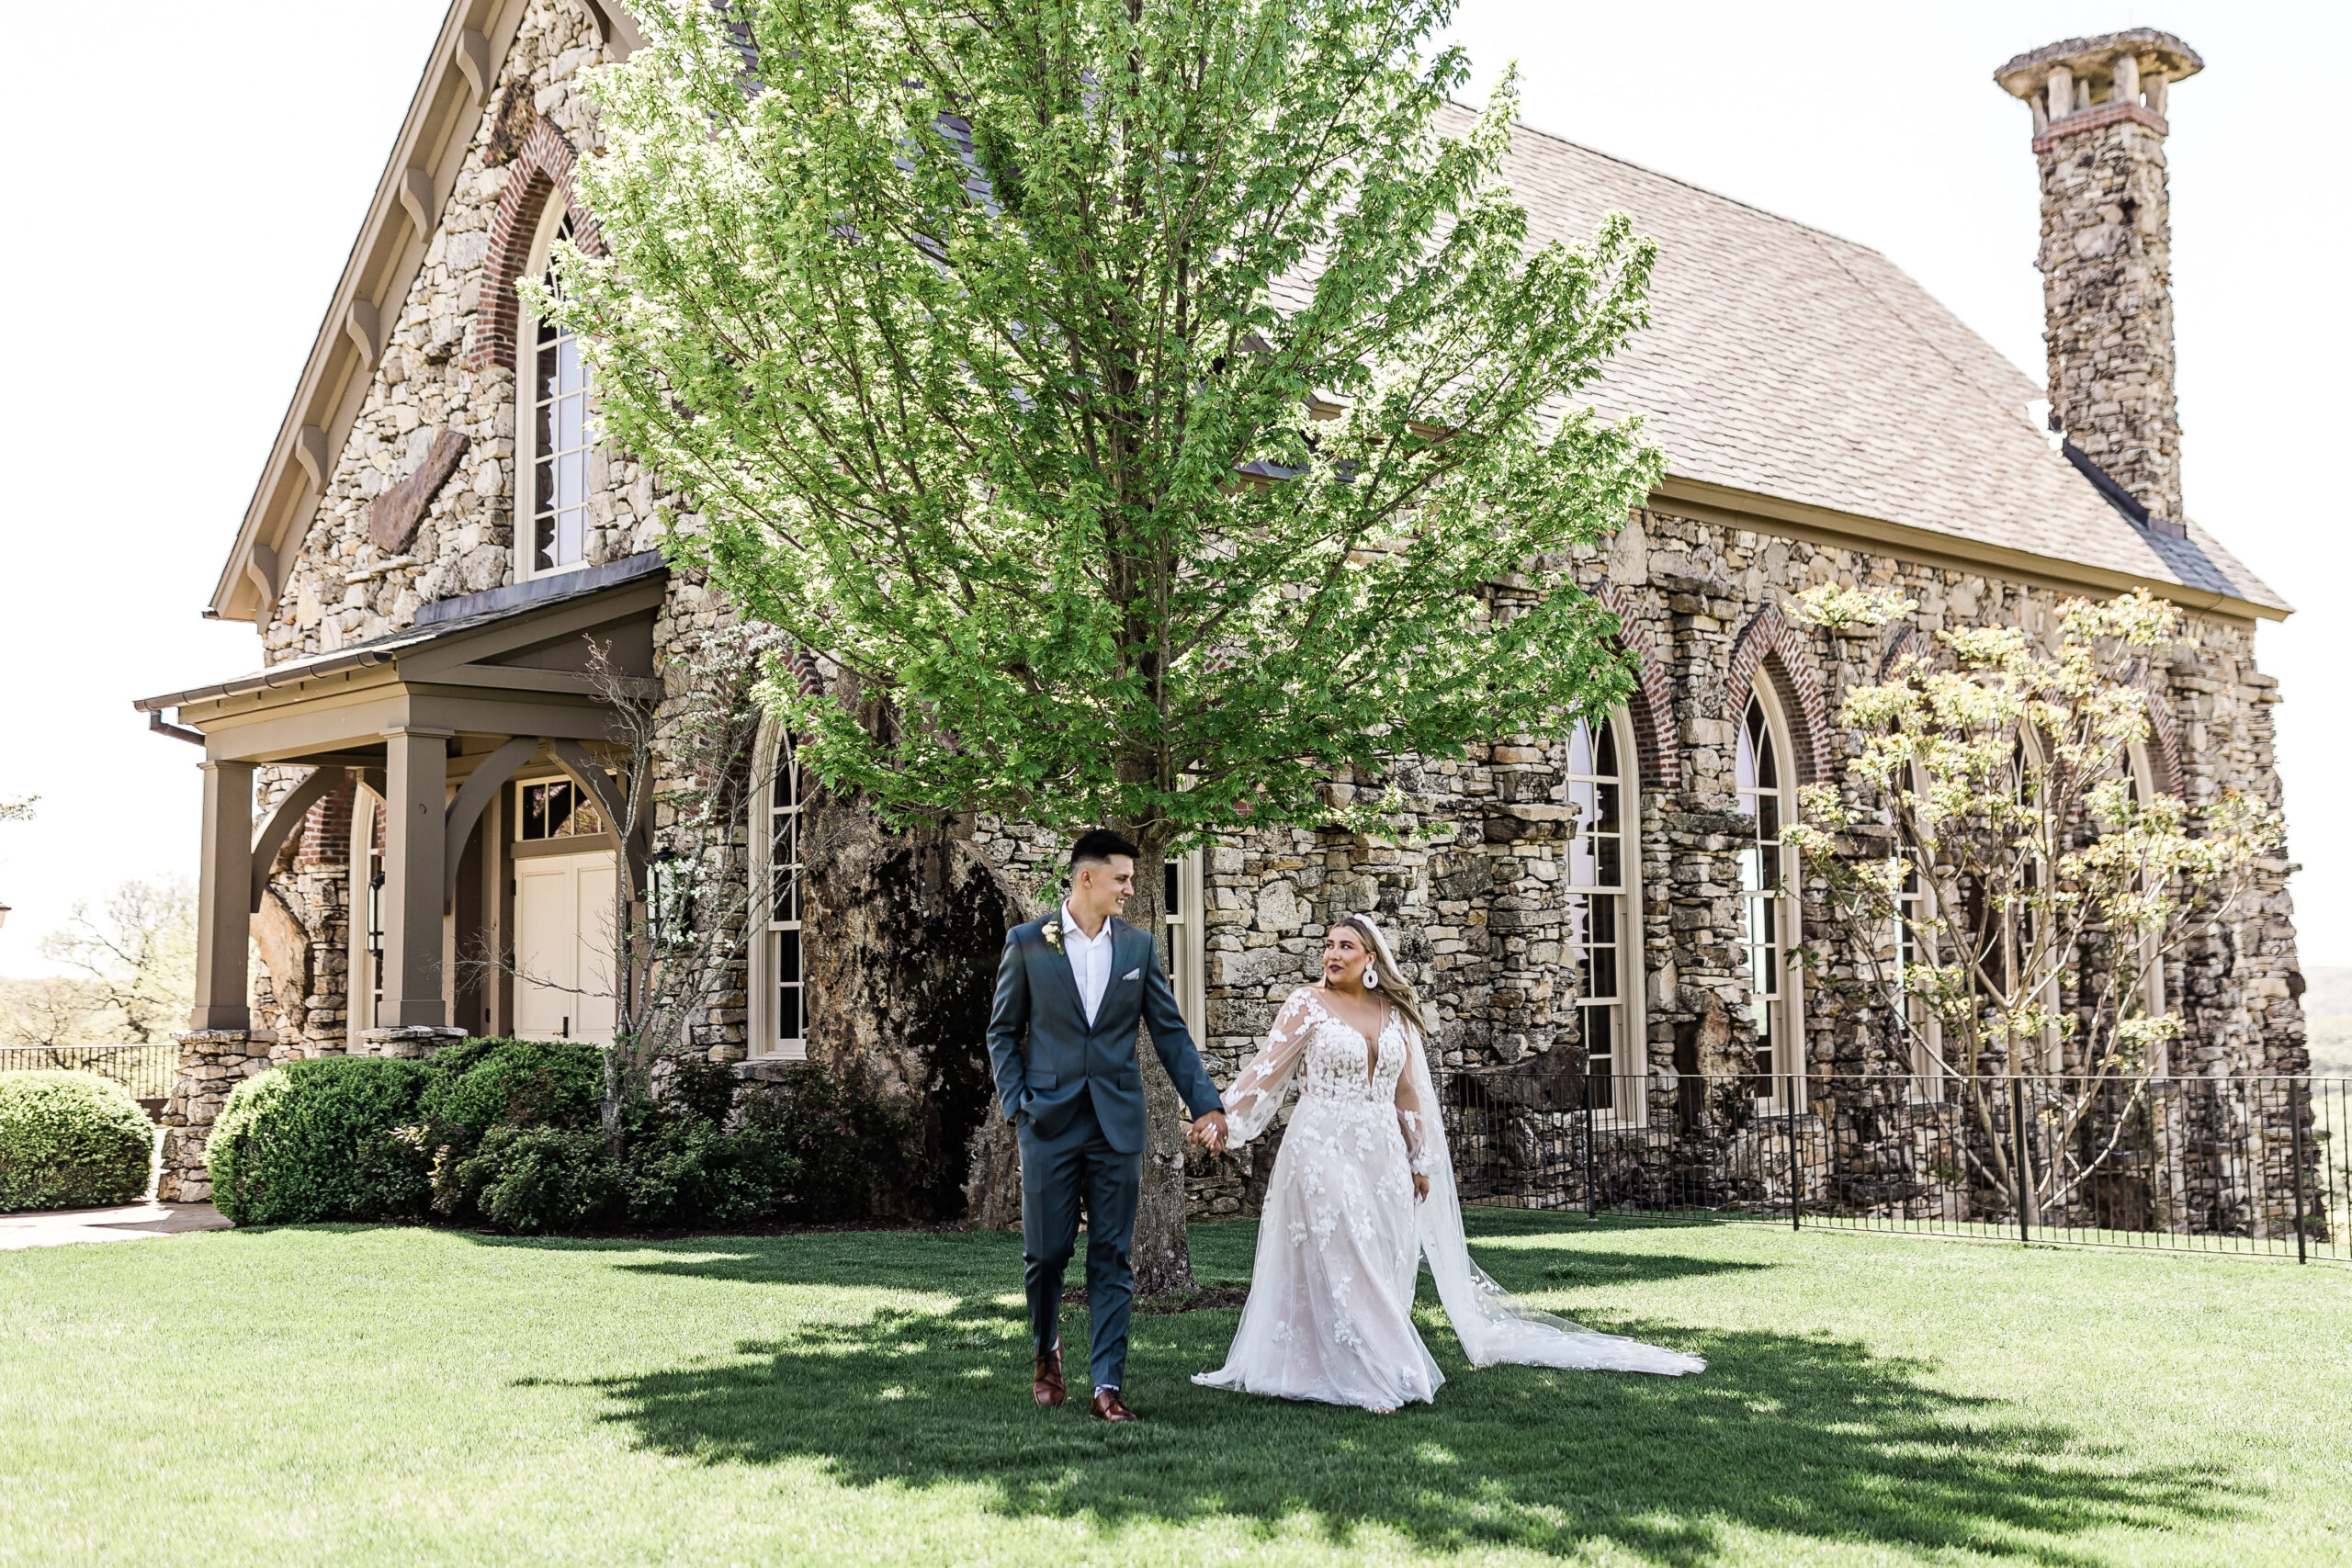 Bride and groom walking side by side in front of the Chapel of the Ozarks in Branson Missouri, Top of the Rock wedding venue